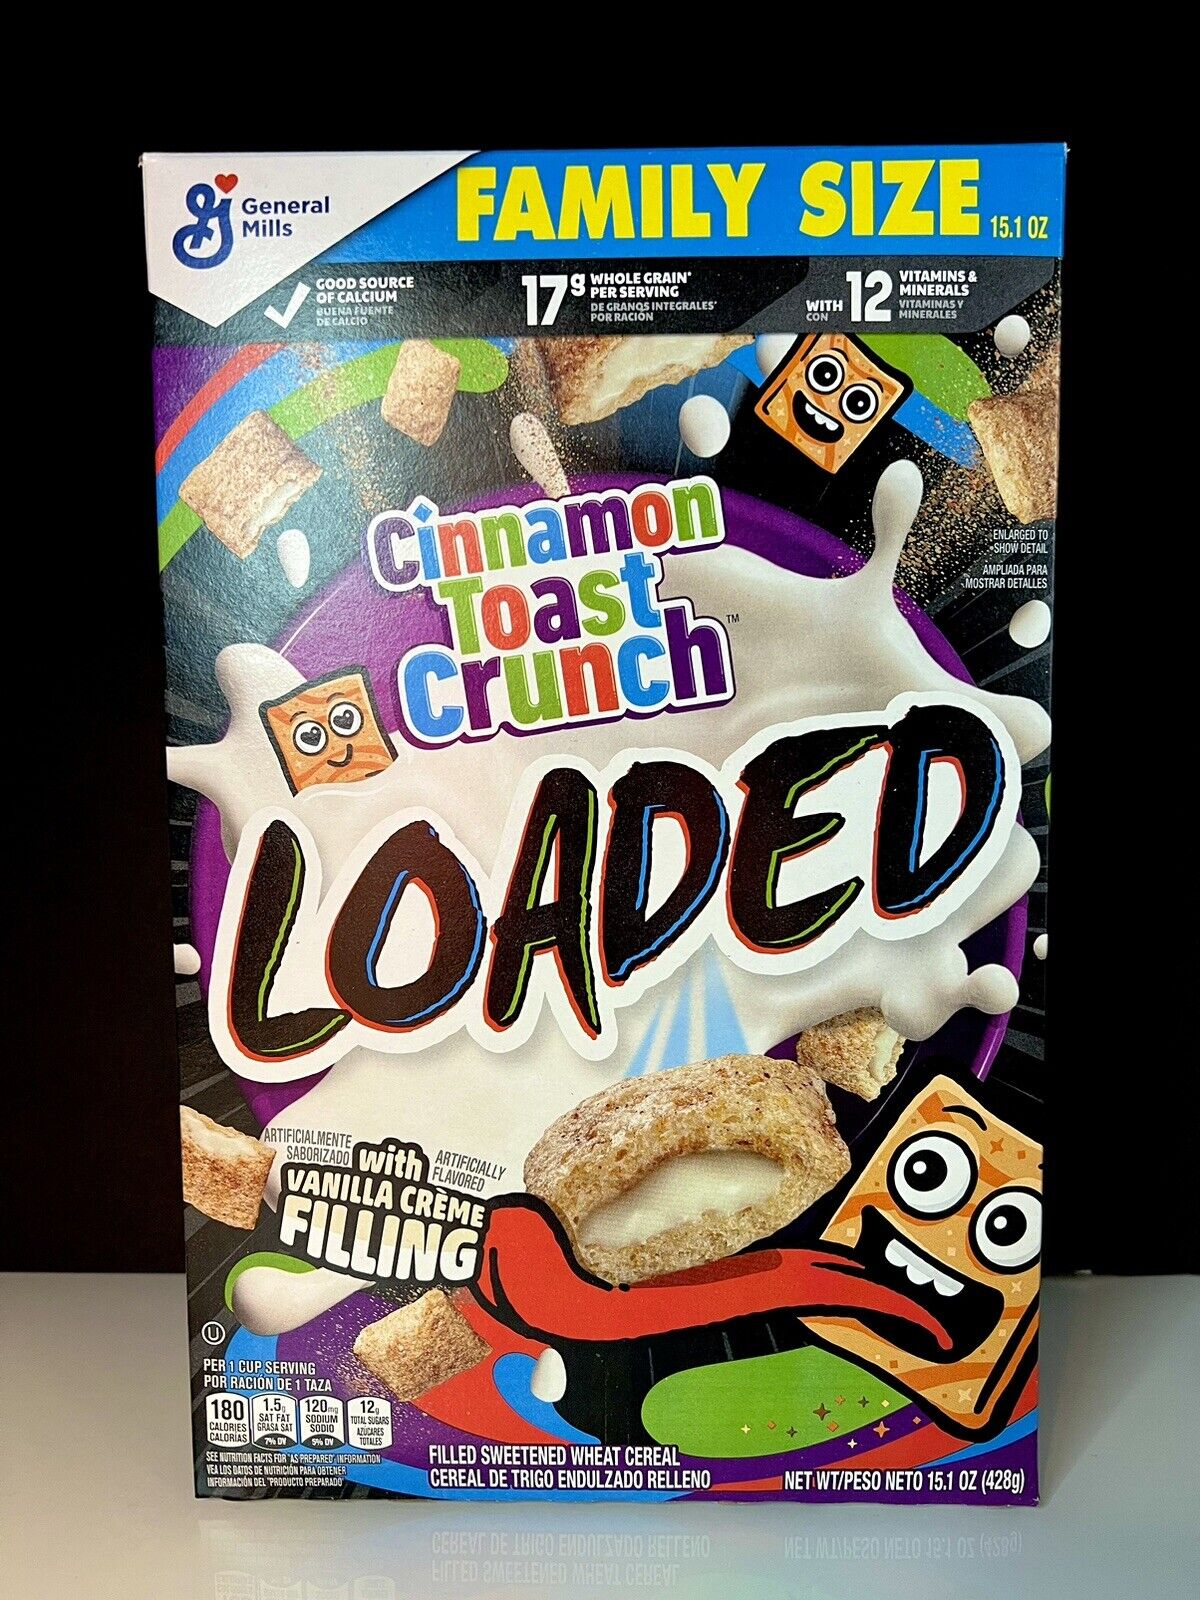 ⚫️ Limited New Cinnamon Toast Crunch Loaded Vanilla Creme Cereal Large Size 13oz